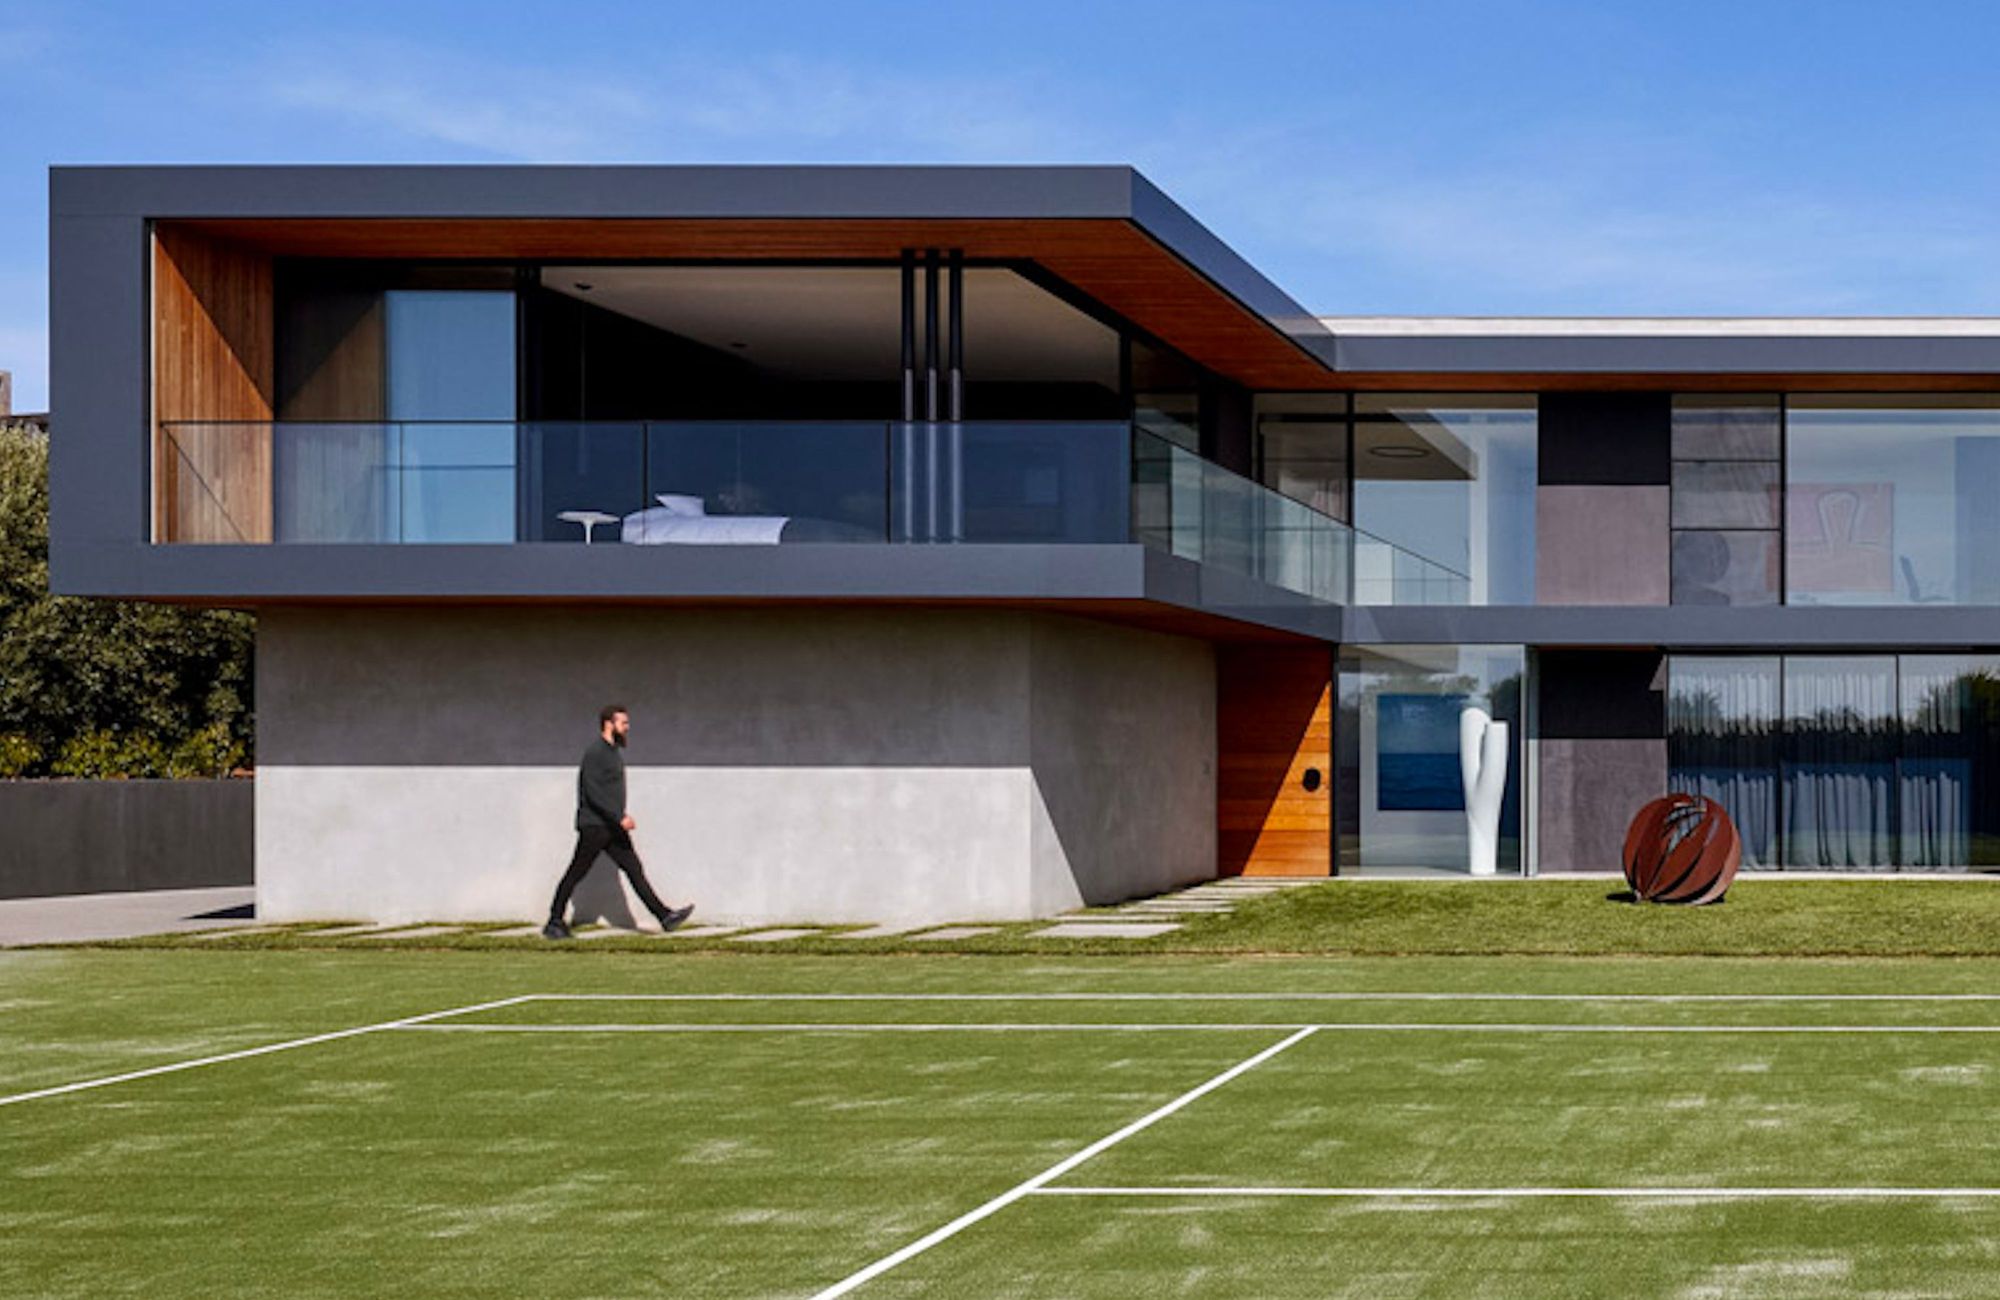 Portsea by Piccolo Architecture showing exterior of a house and a tennis court in the foreground